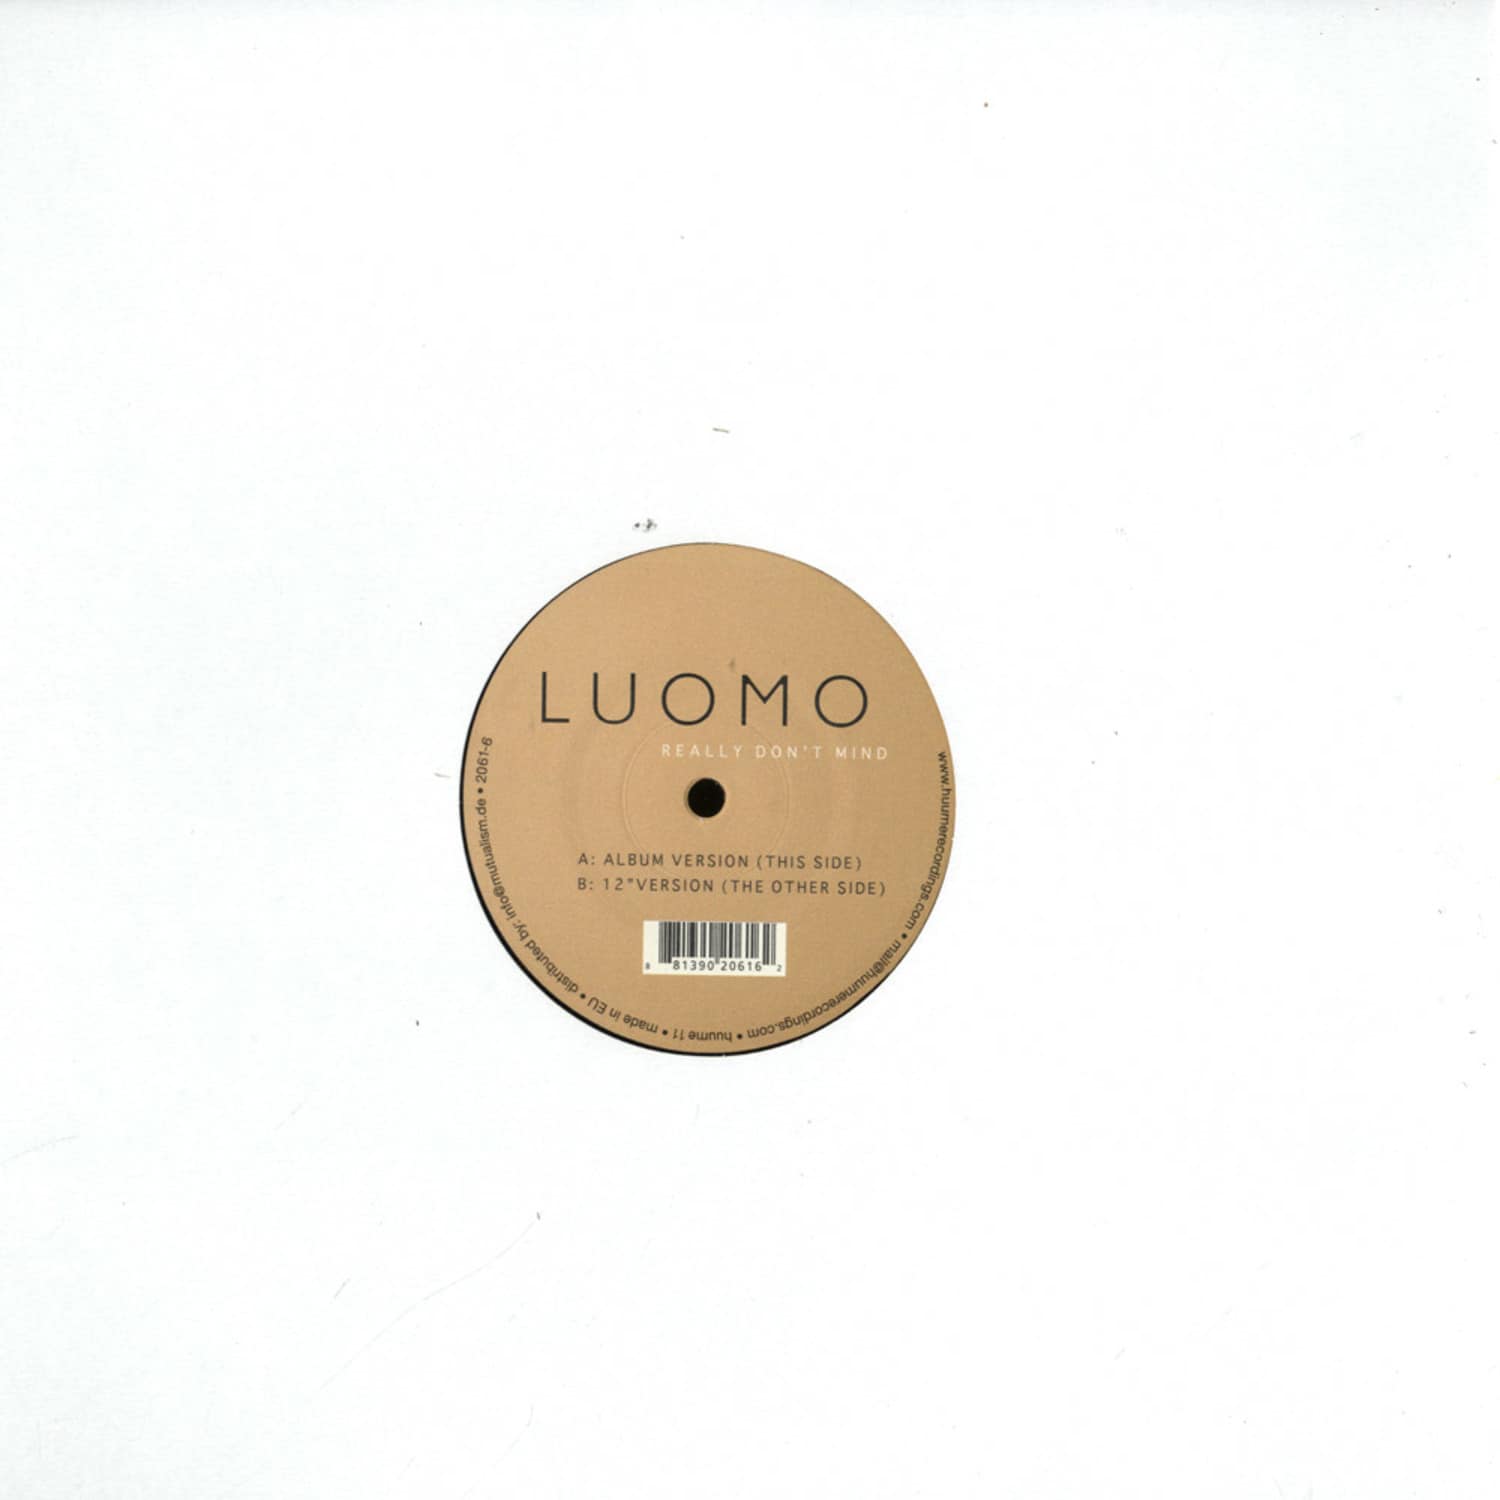 Luomo - REALLY DONT MIND